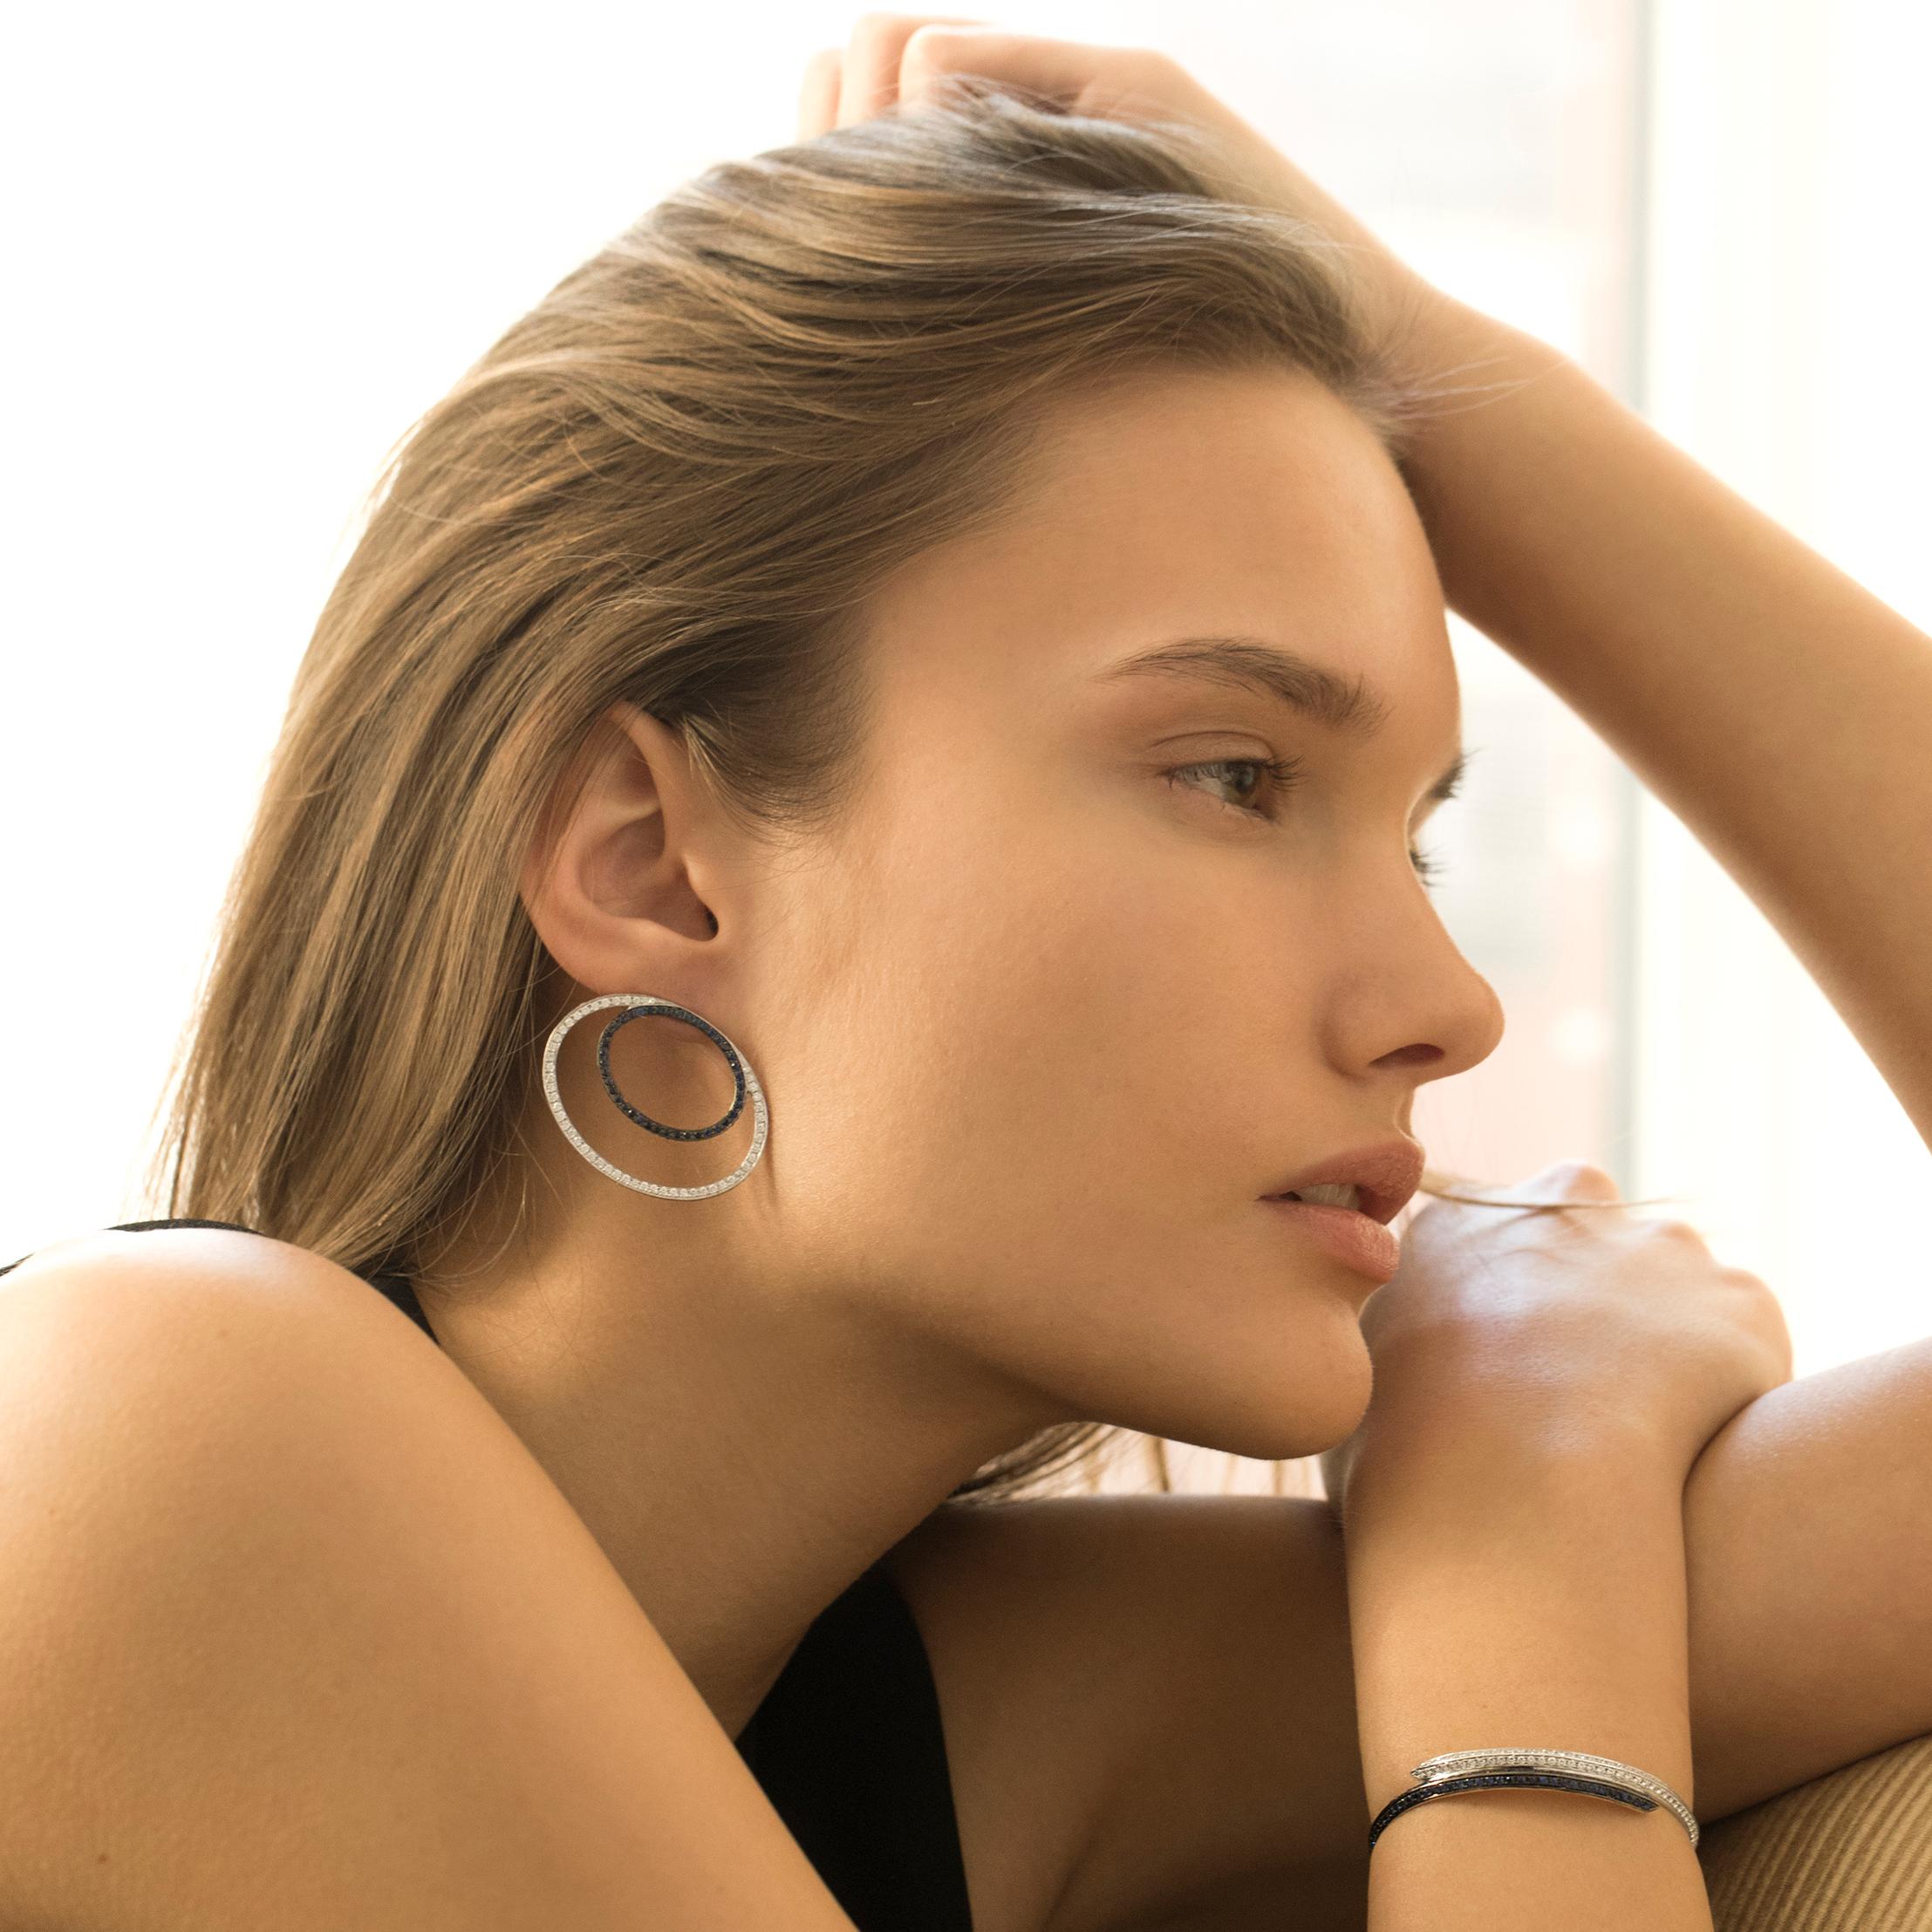 18kt white gold oval earrings with diamonds and sapphires from Ralph Masri's Modernist collection, inspired by mid-century Modernist architecture with an emphasis on minimalist shapes and silhouettes.

Available in yellow, rose or white gold.

Push